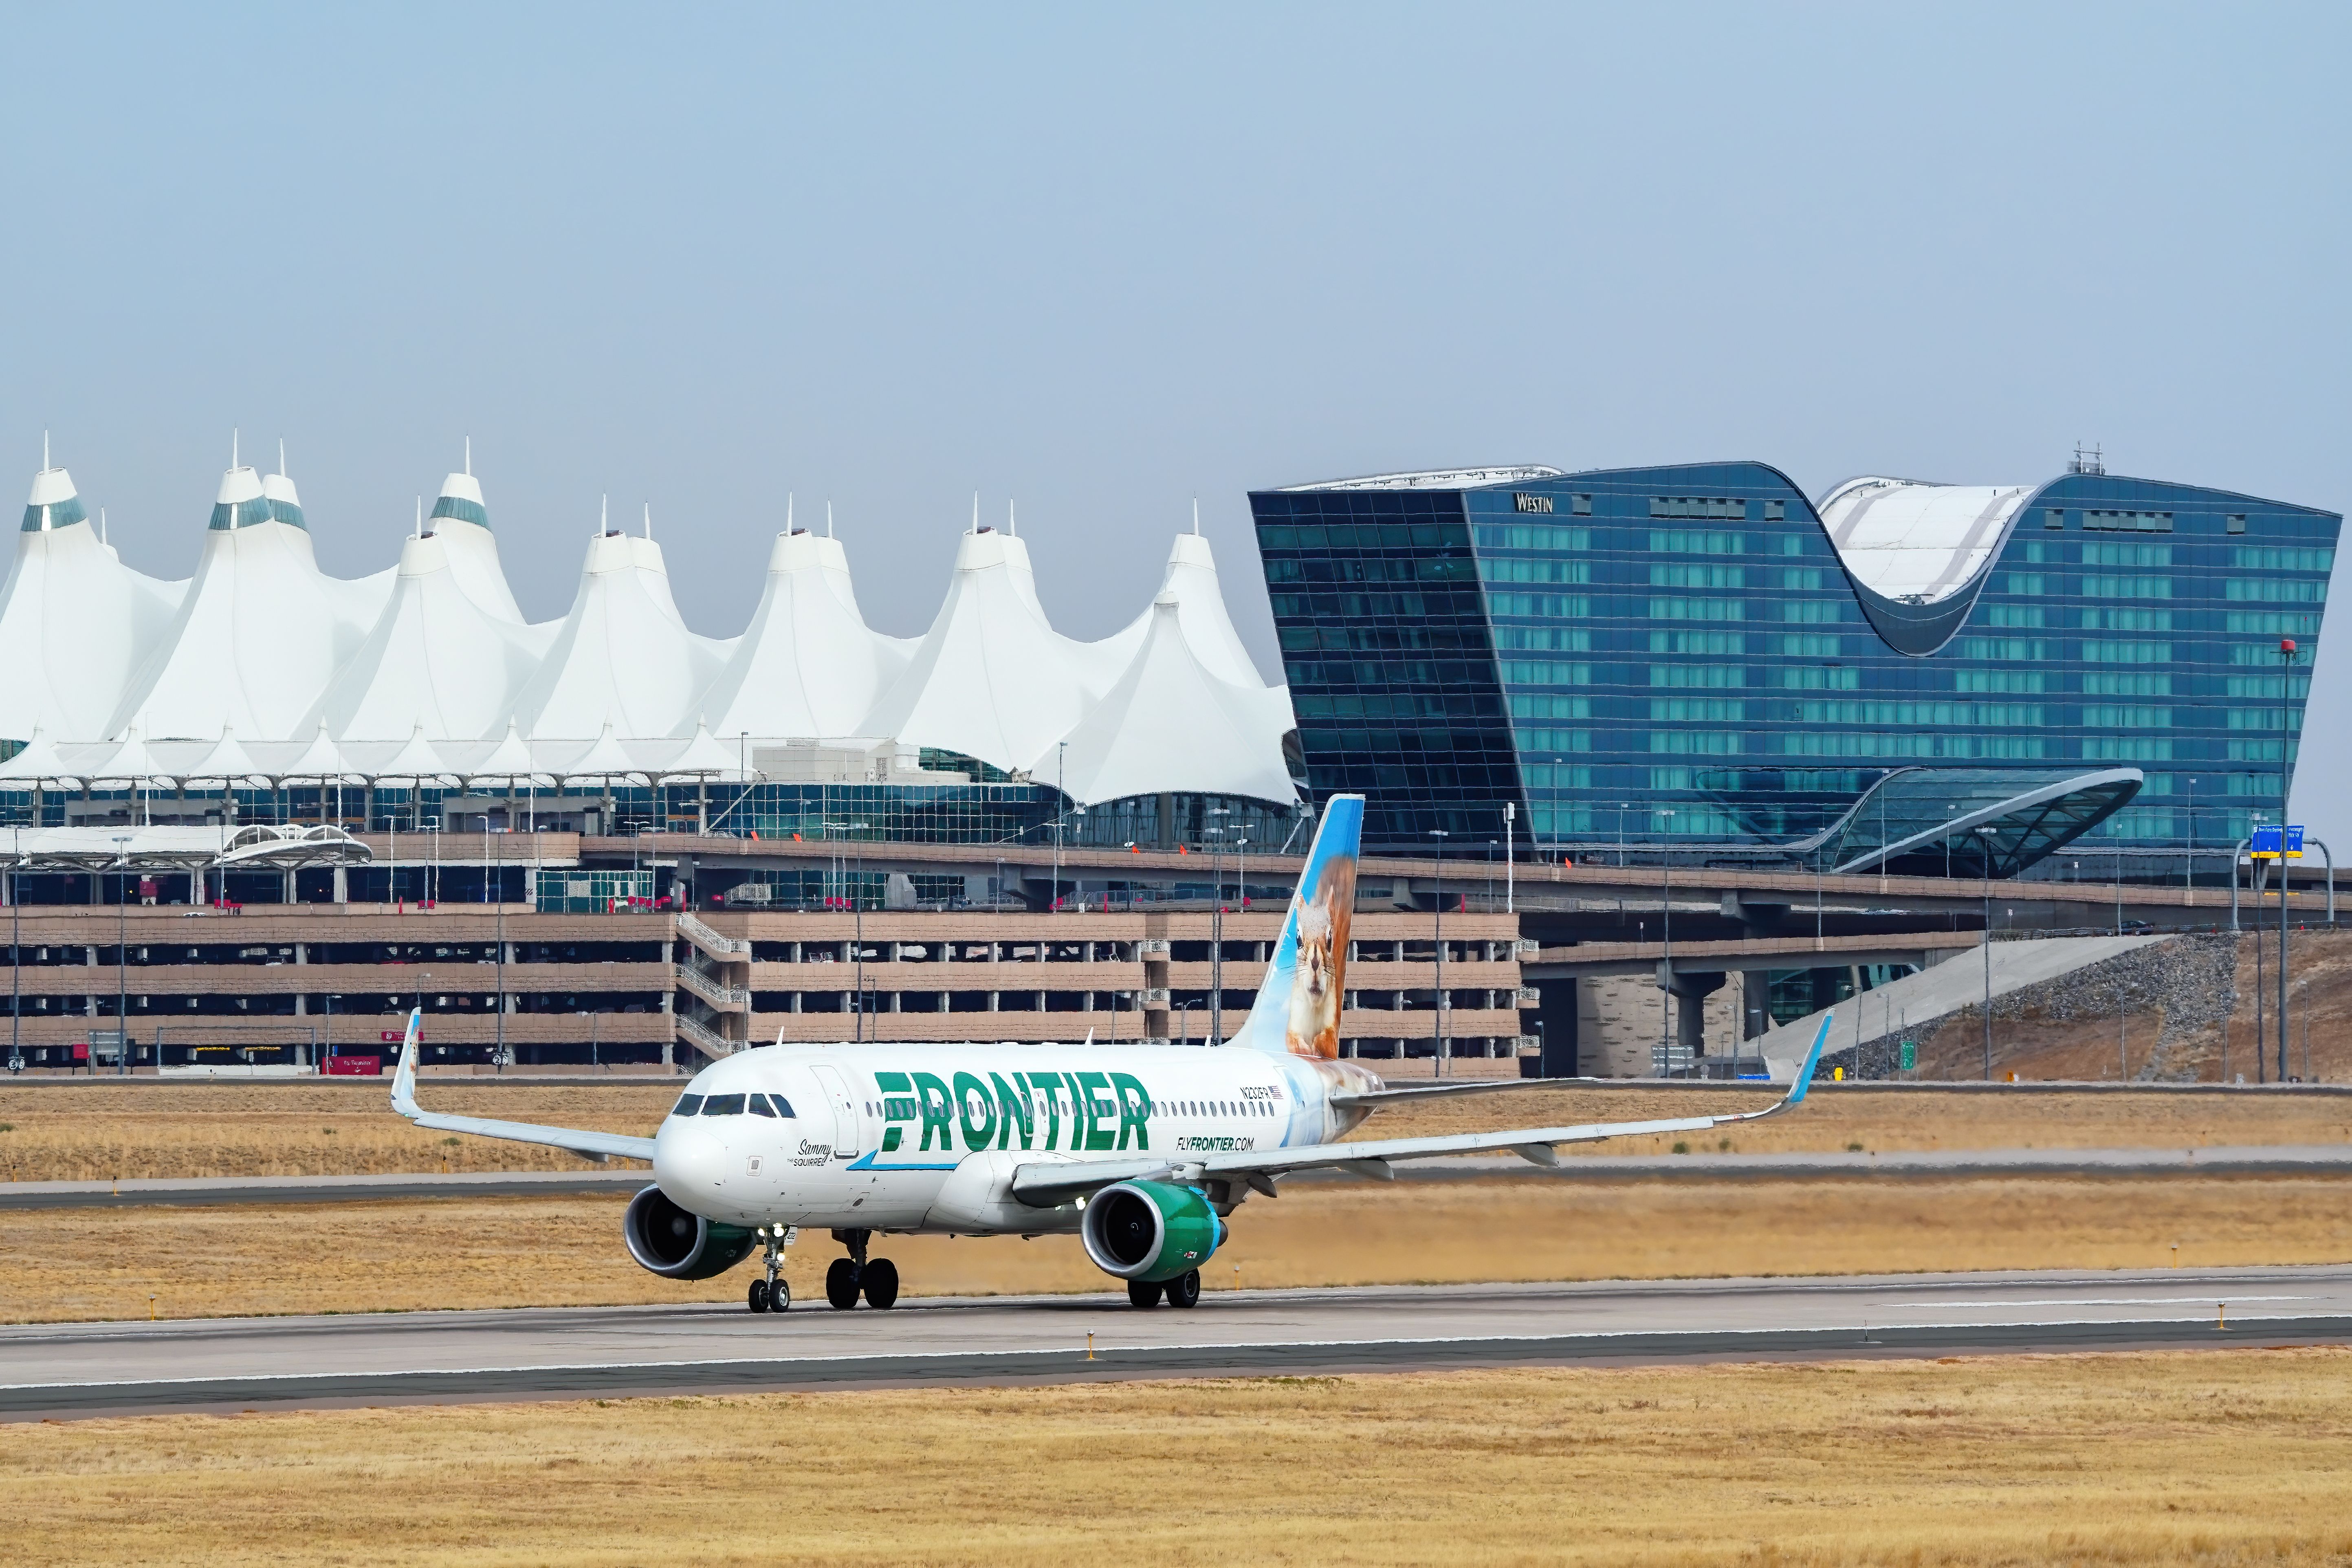 Frontier Airlines at Denver International Airport